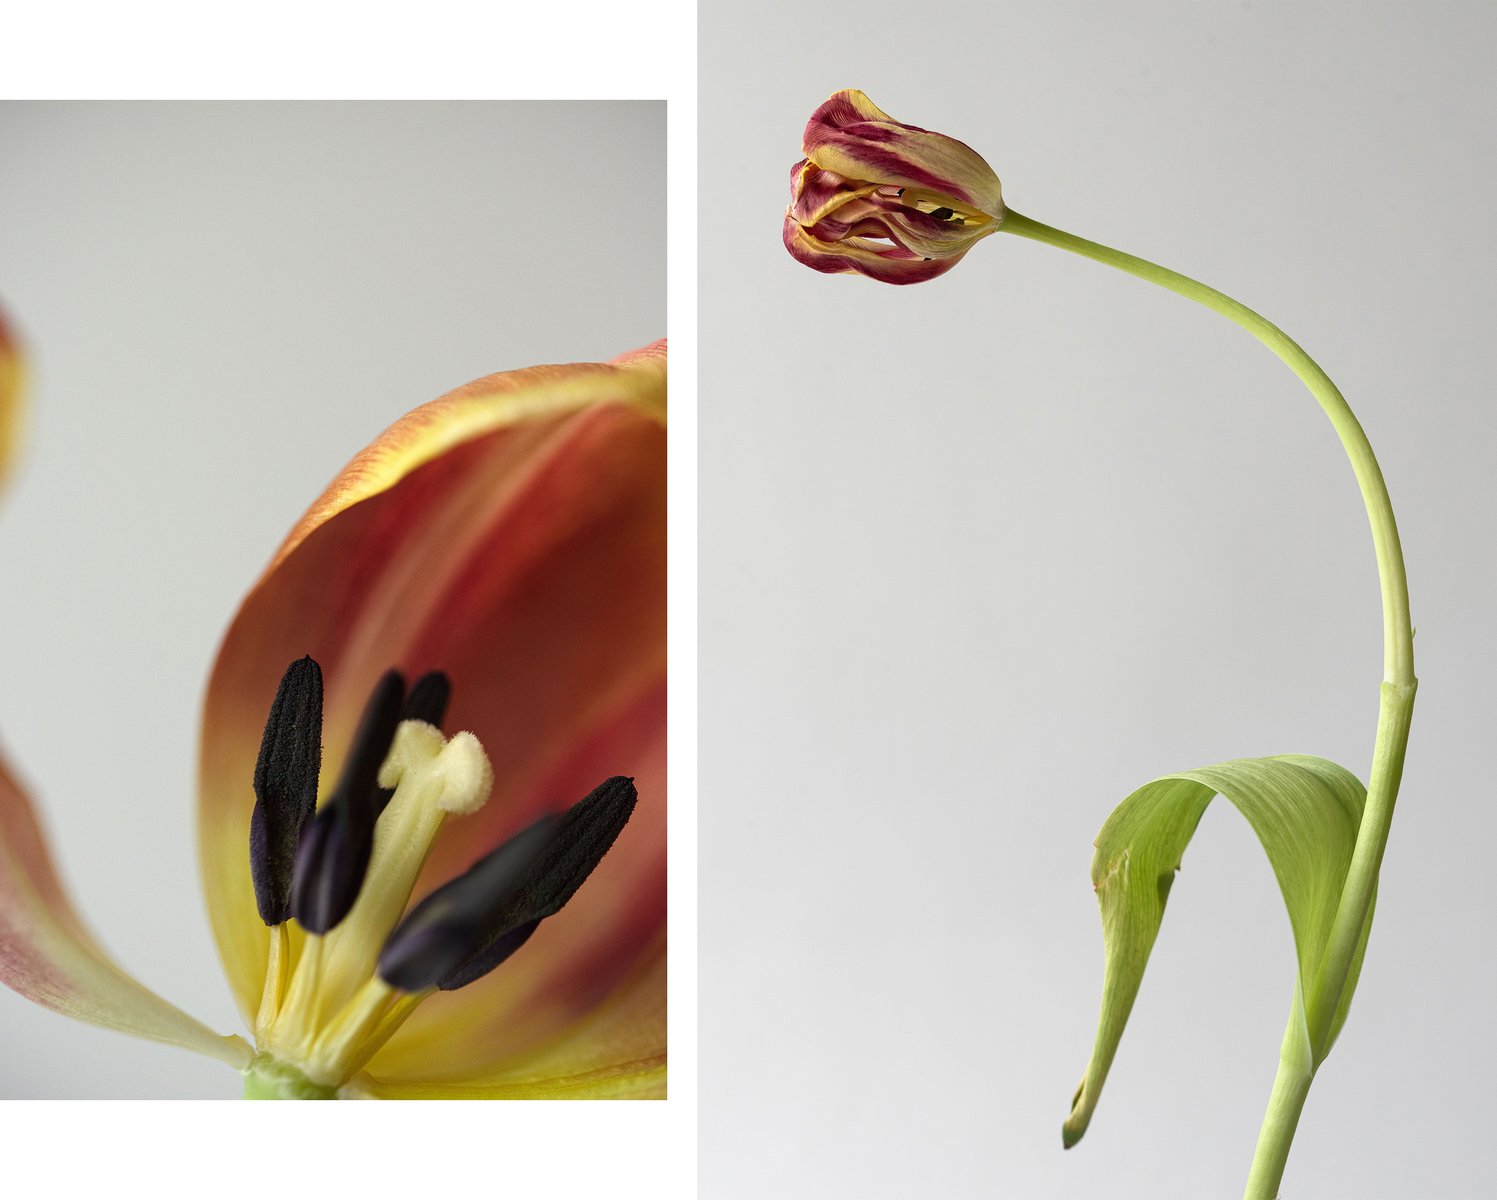  Personal Work
Diptych:

Left image: close-up of the inside of a red, orange, and yellow tulip.

Right image: a red, orange, and yellow tulip that is just beginning to curve and wilt. by Sydney SG